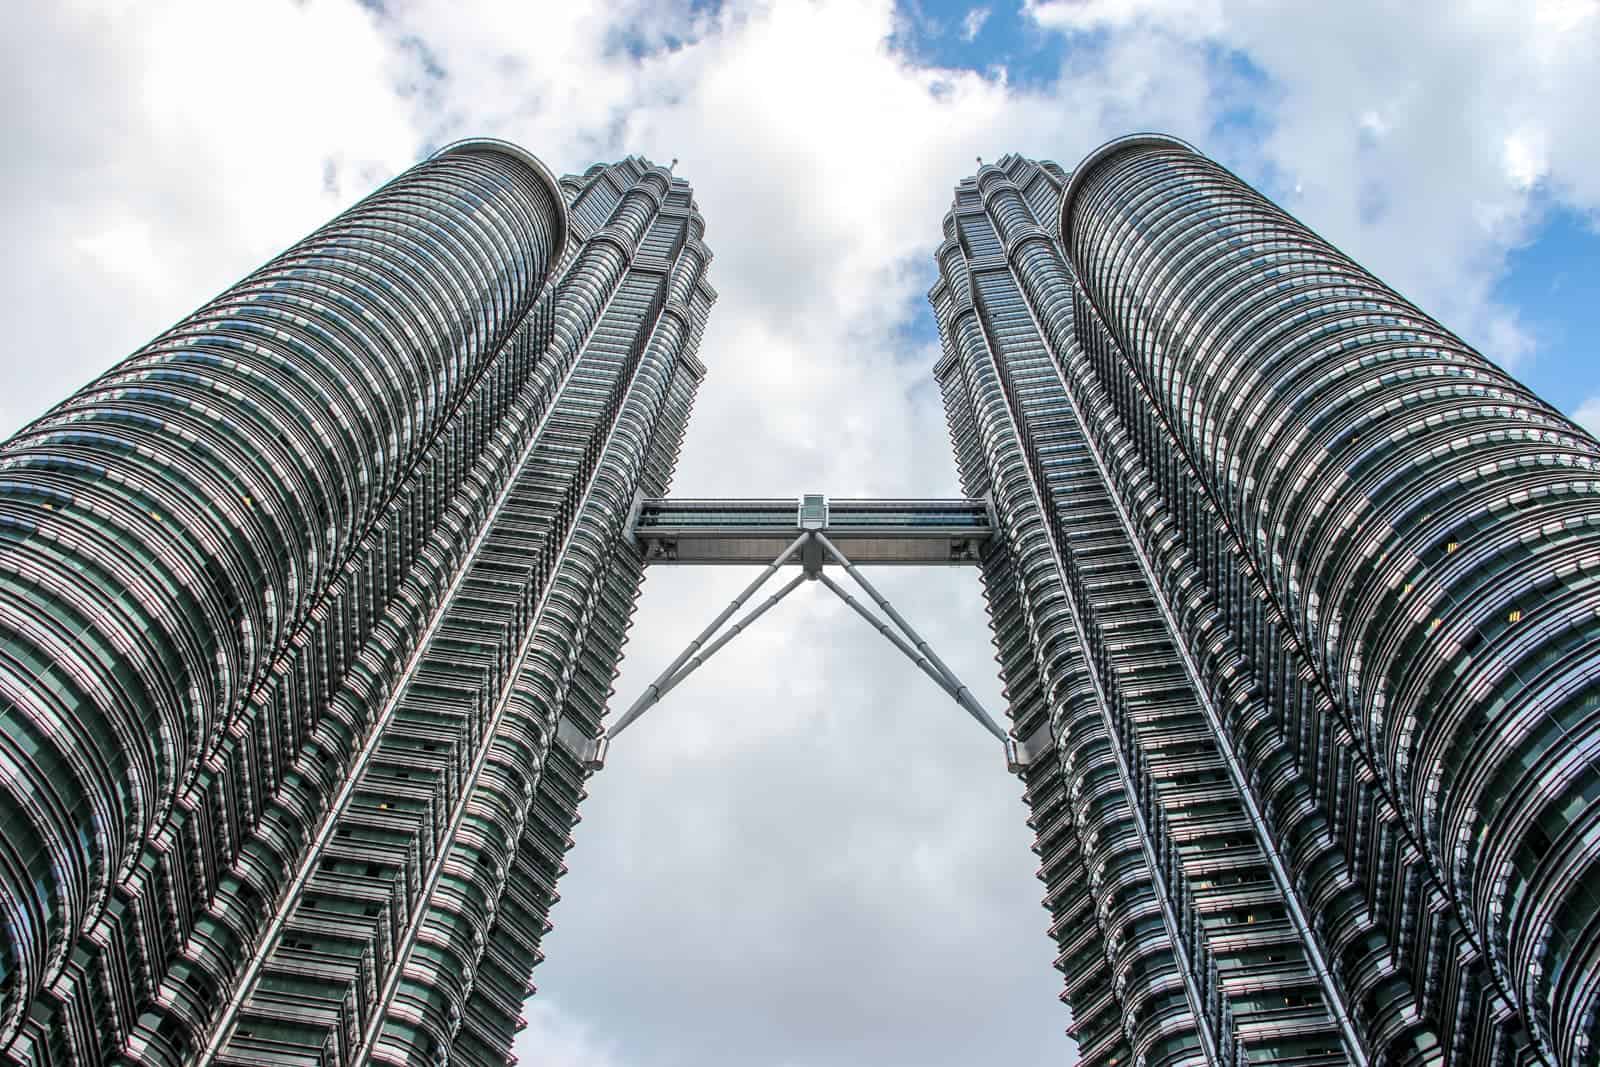 The Petronas Towers top the things to see in Kuala Lumpur list 